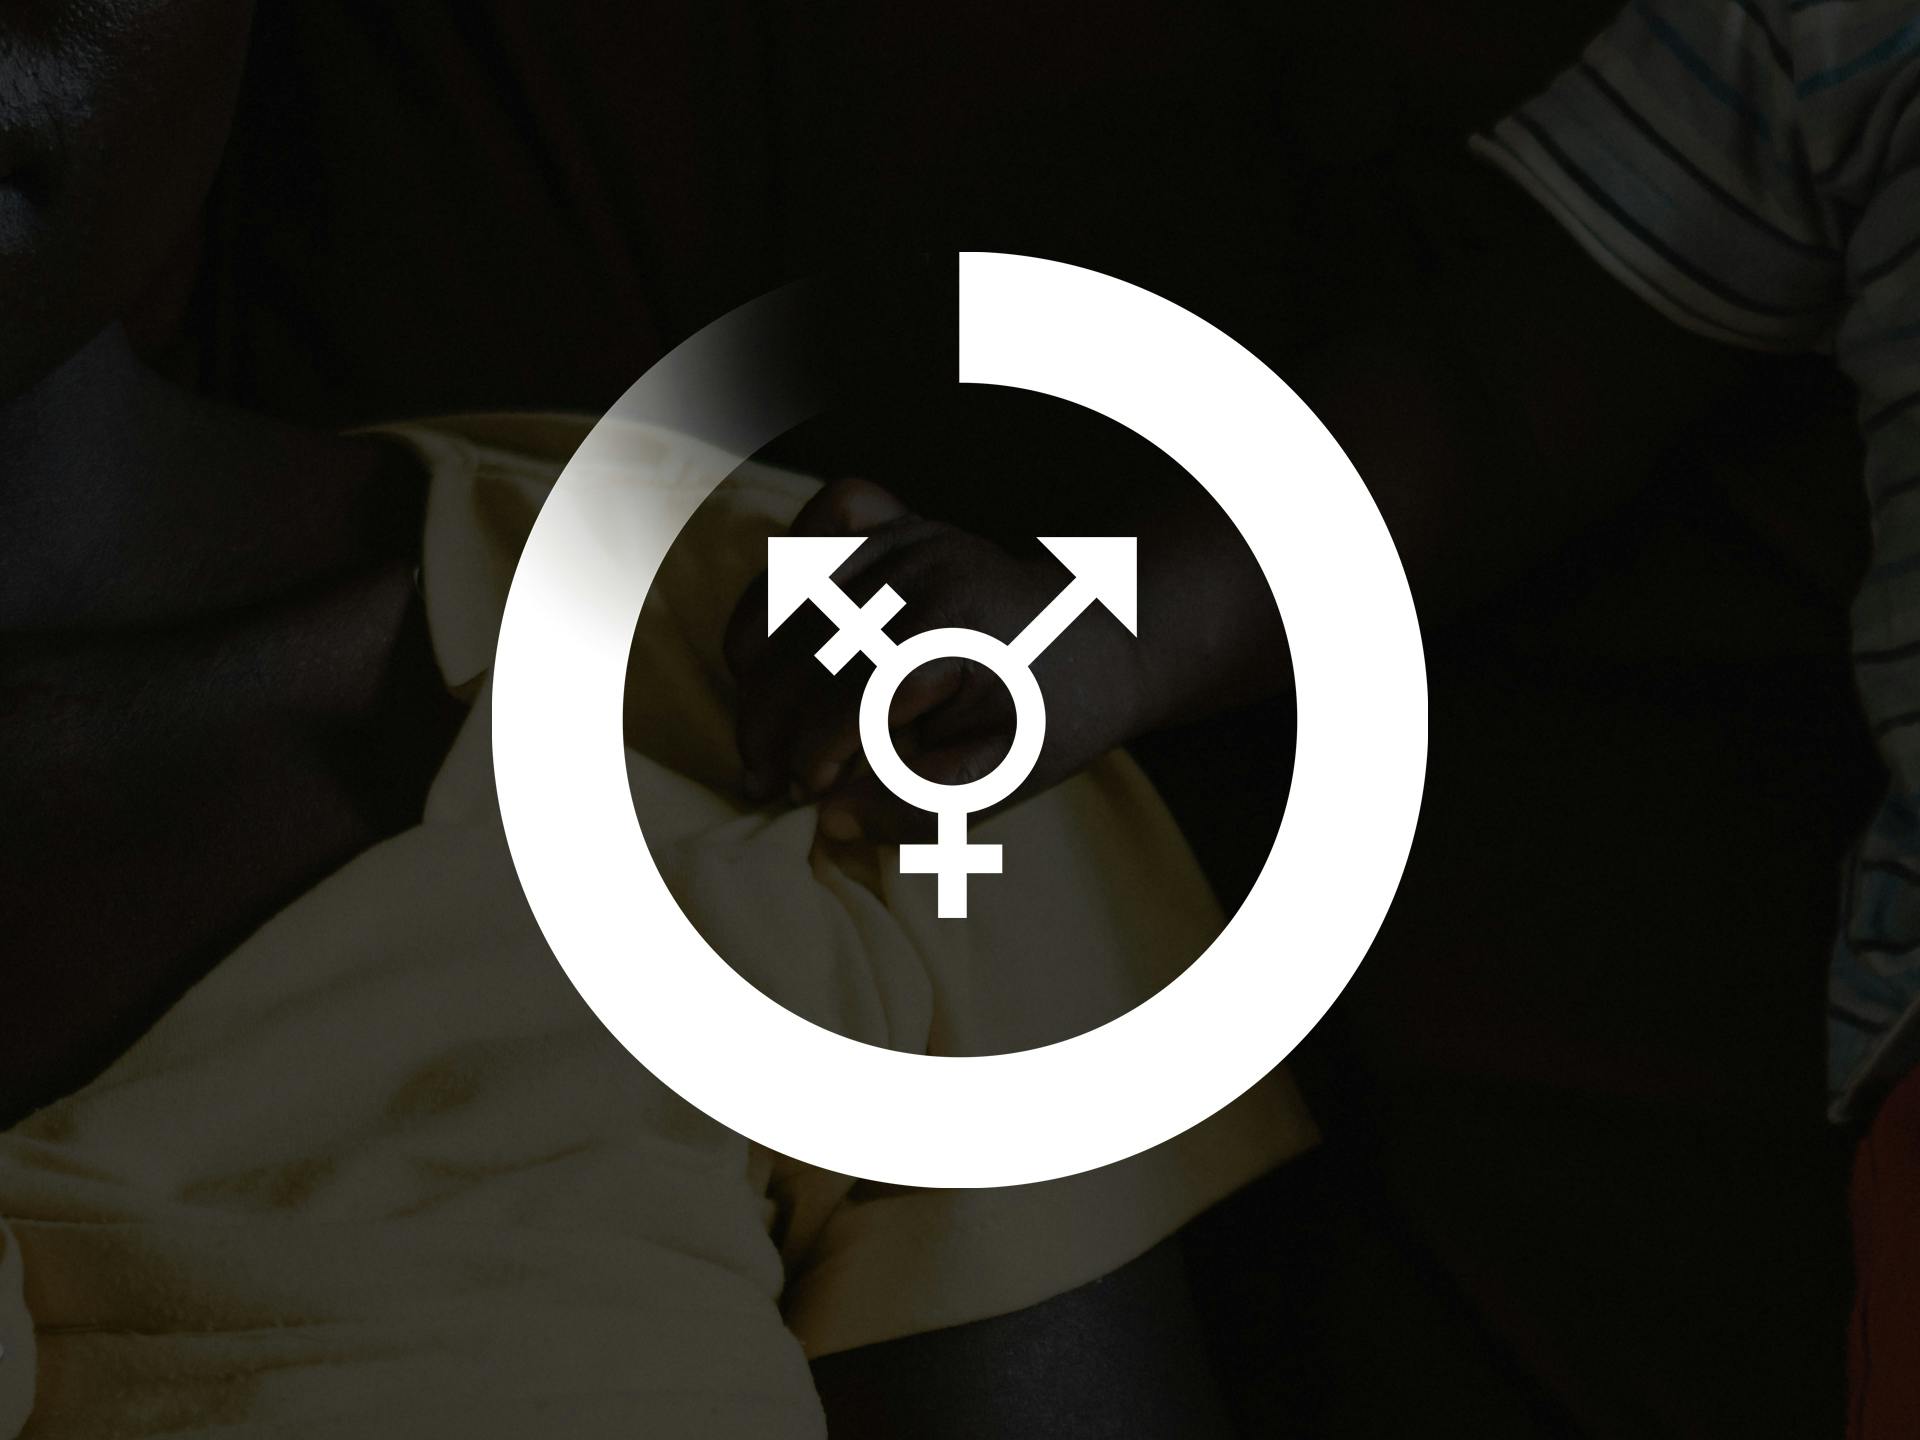 A graphic image showing the symbol of equality inside Diakonia's progress circle